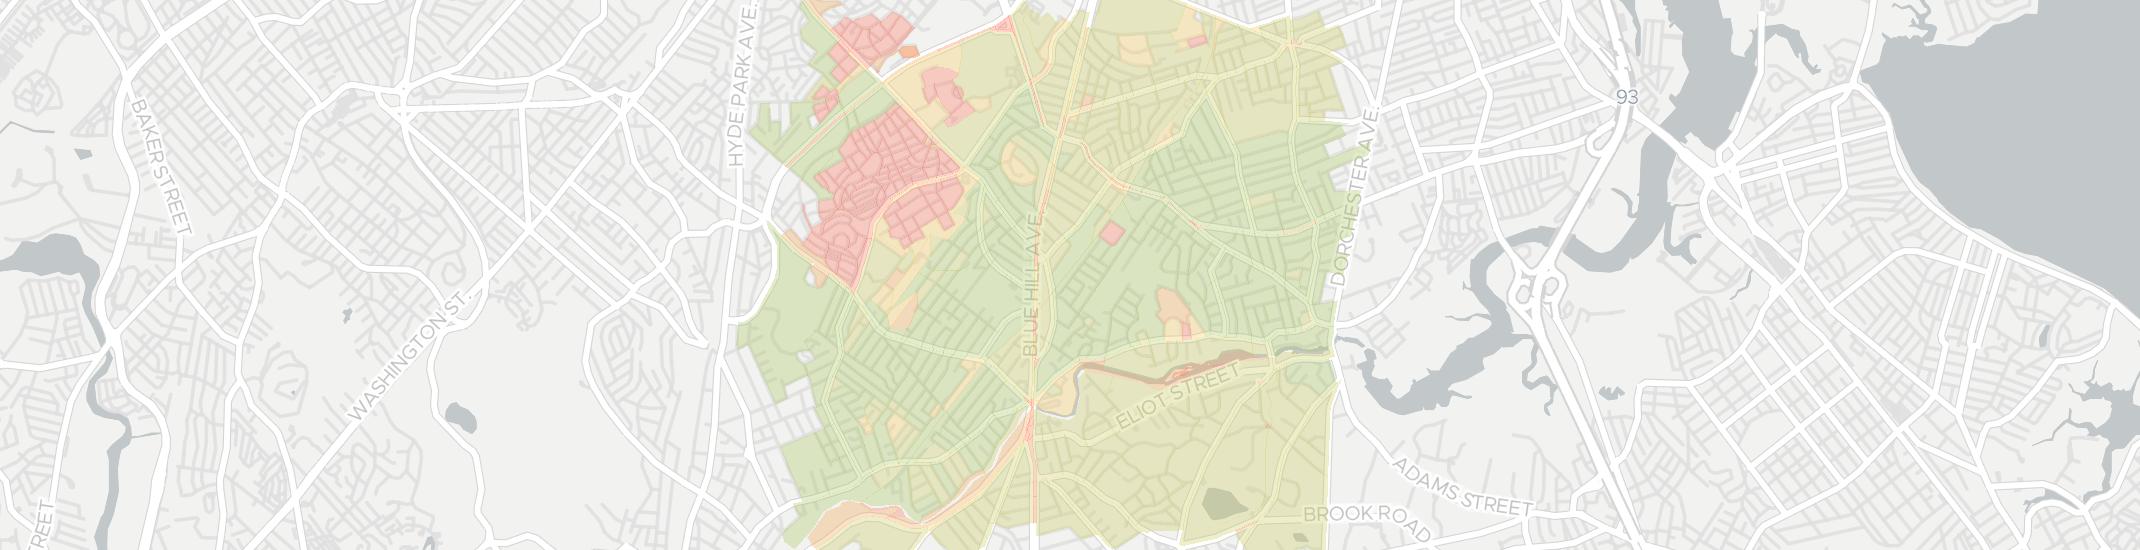 Mattapan Internet Competition Map. Click for interactive map.